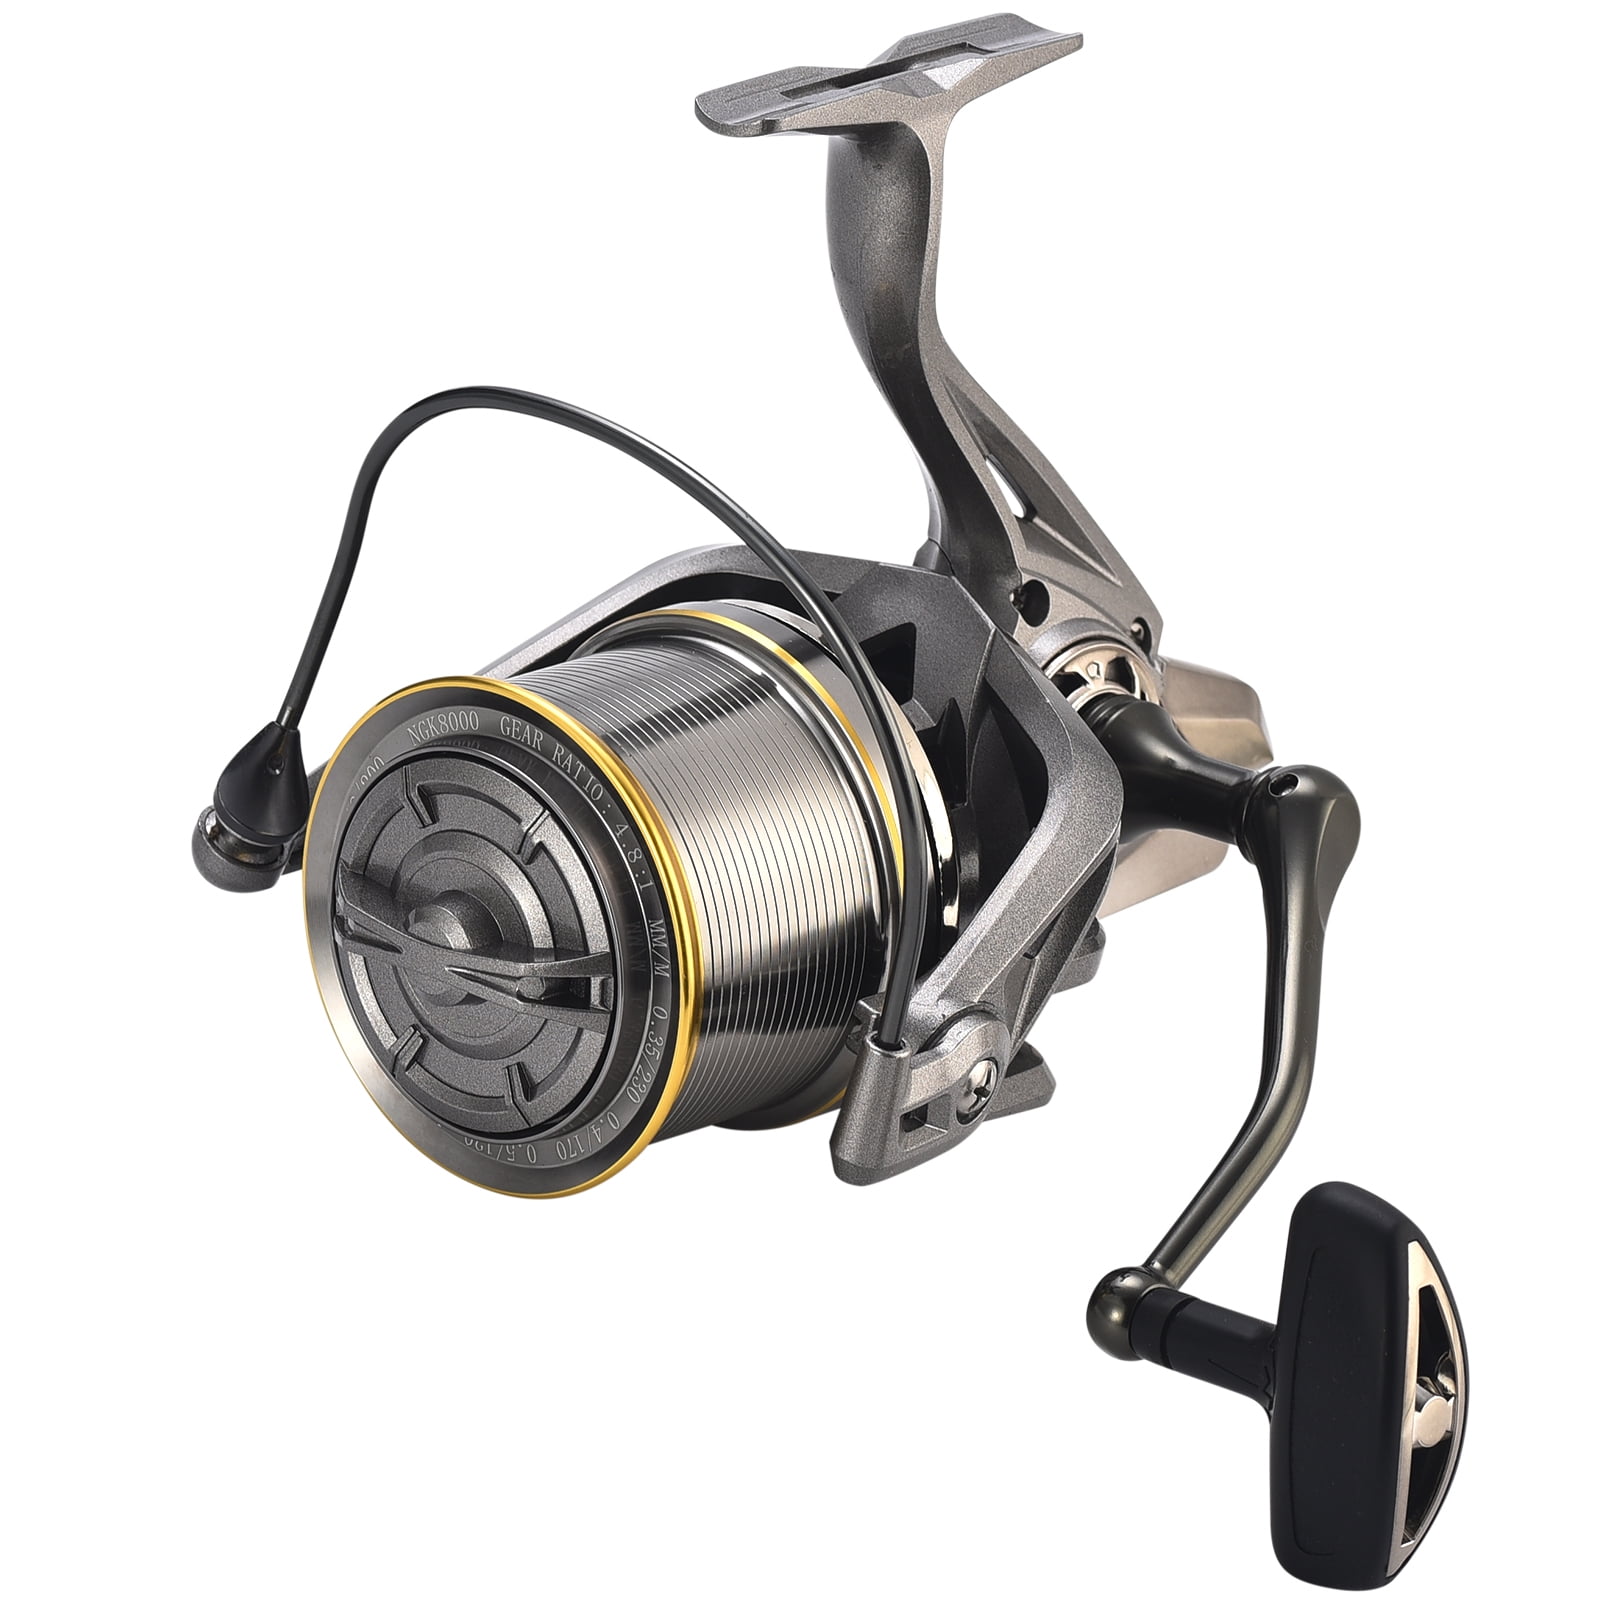 17+1bb Spinning Reel 4.8:1 with Interchangeable Left and Right Handle, Size: NGK14000